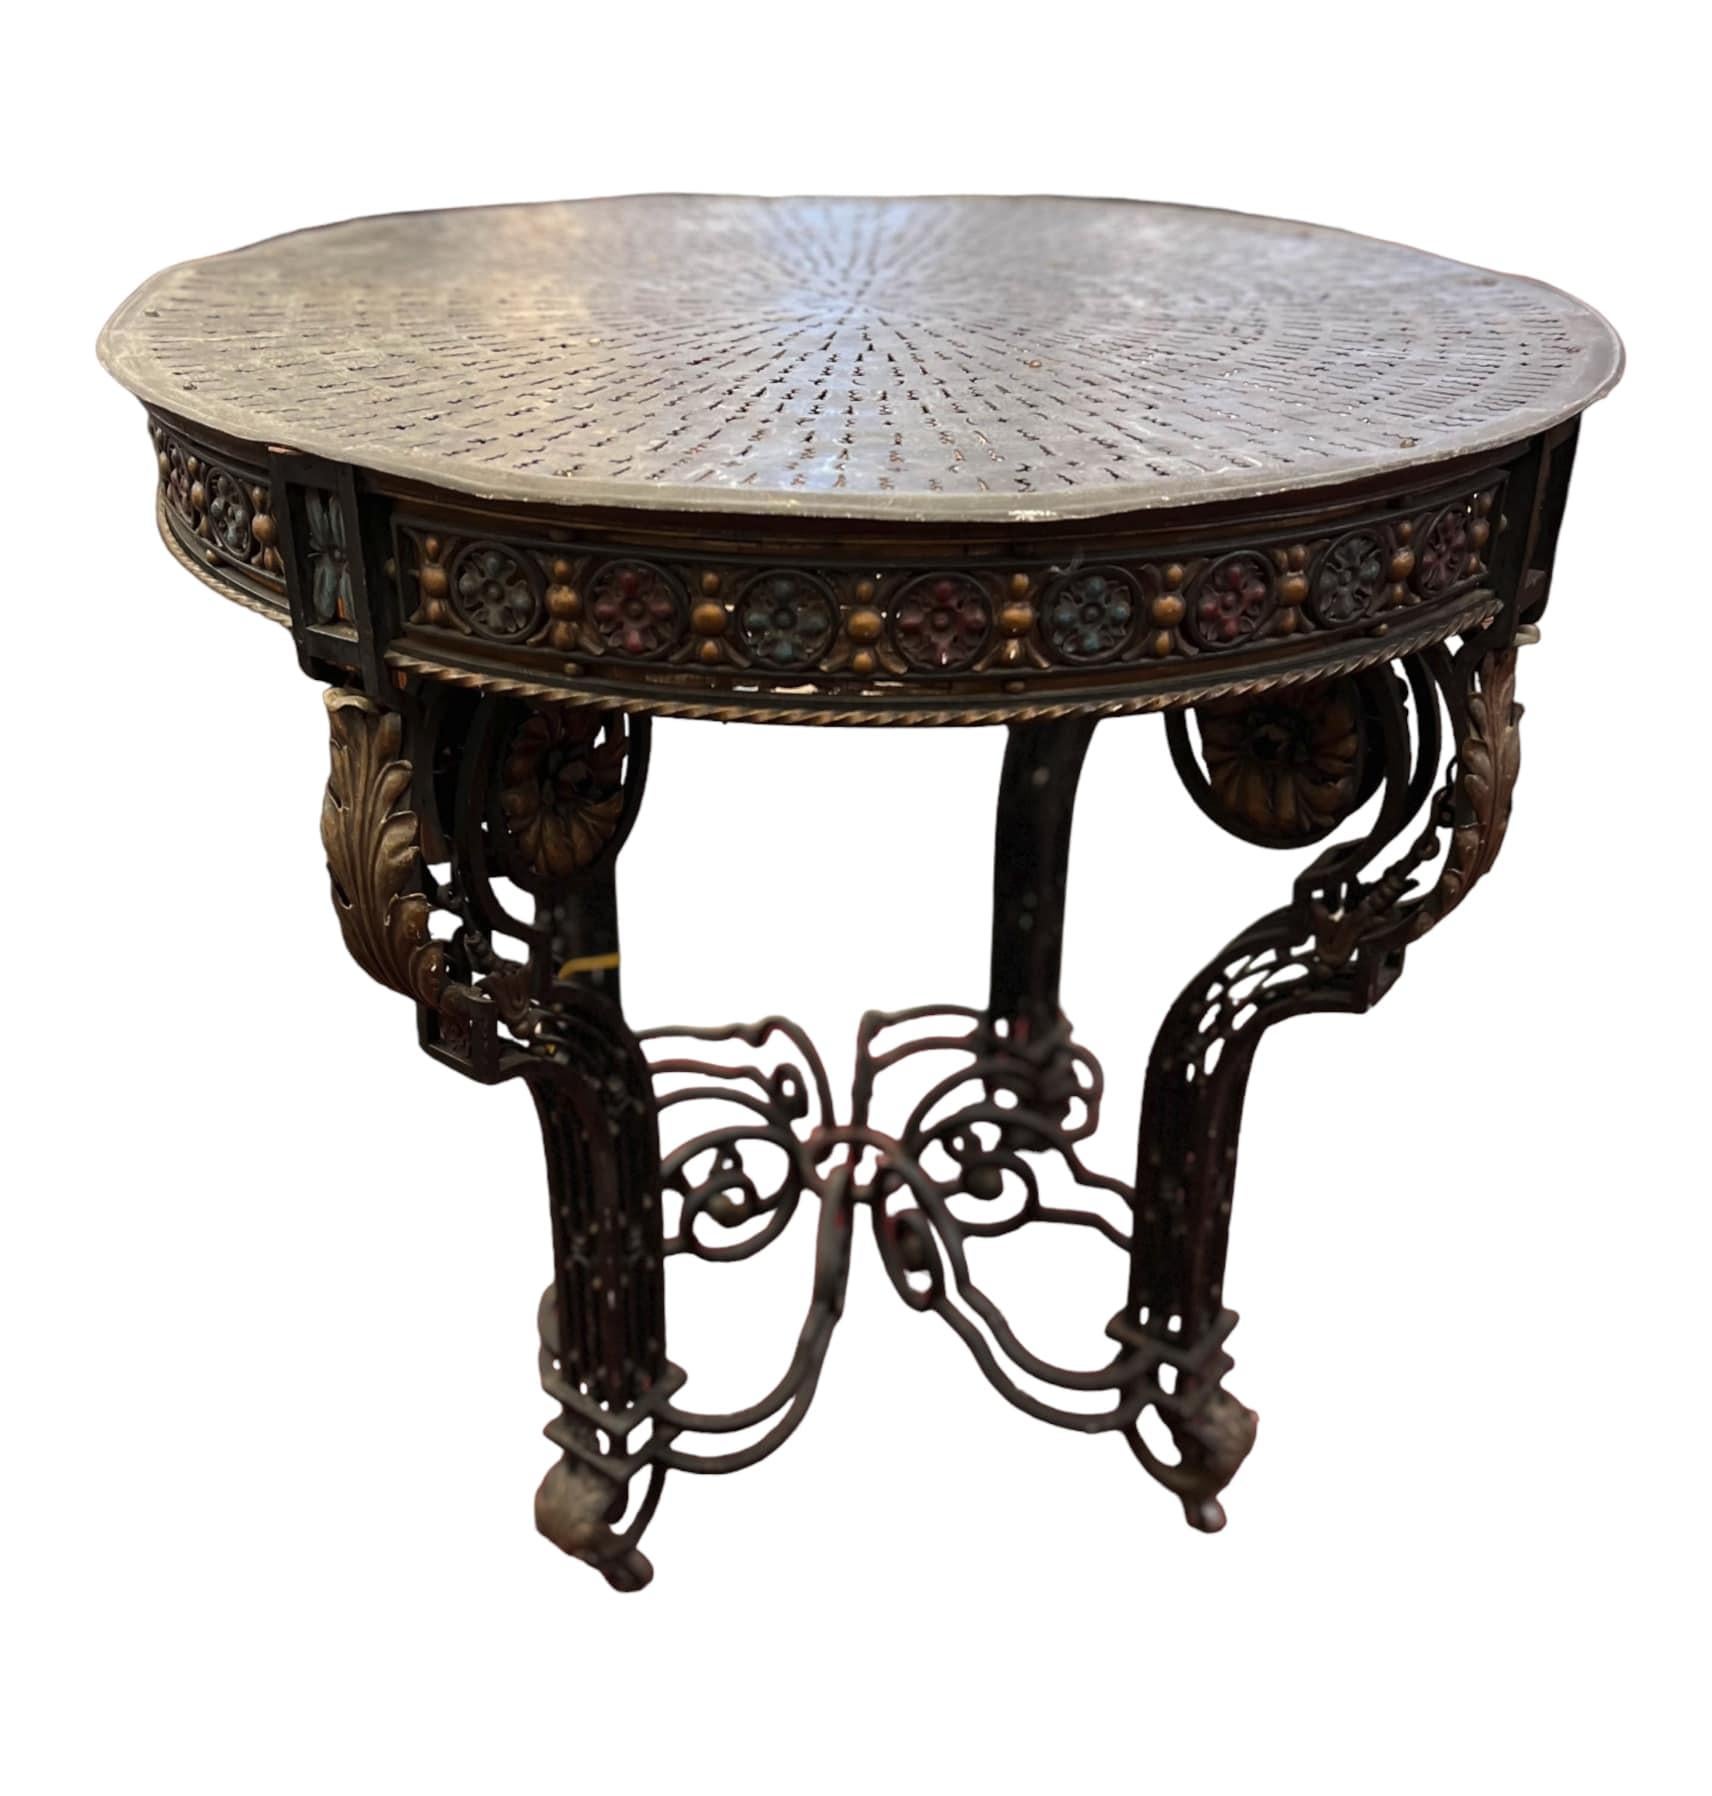 19th Century Wrought Iron 32 Inch Round Table With Built-In Light In Good Condition For Sale In Palm Beach Gardens, FL